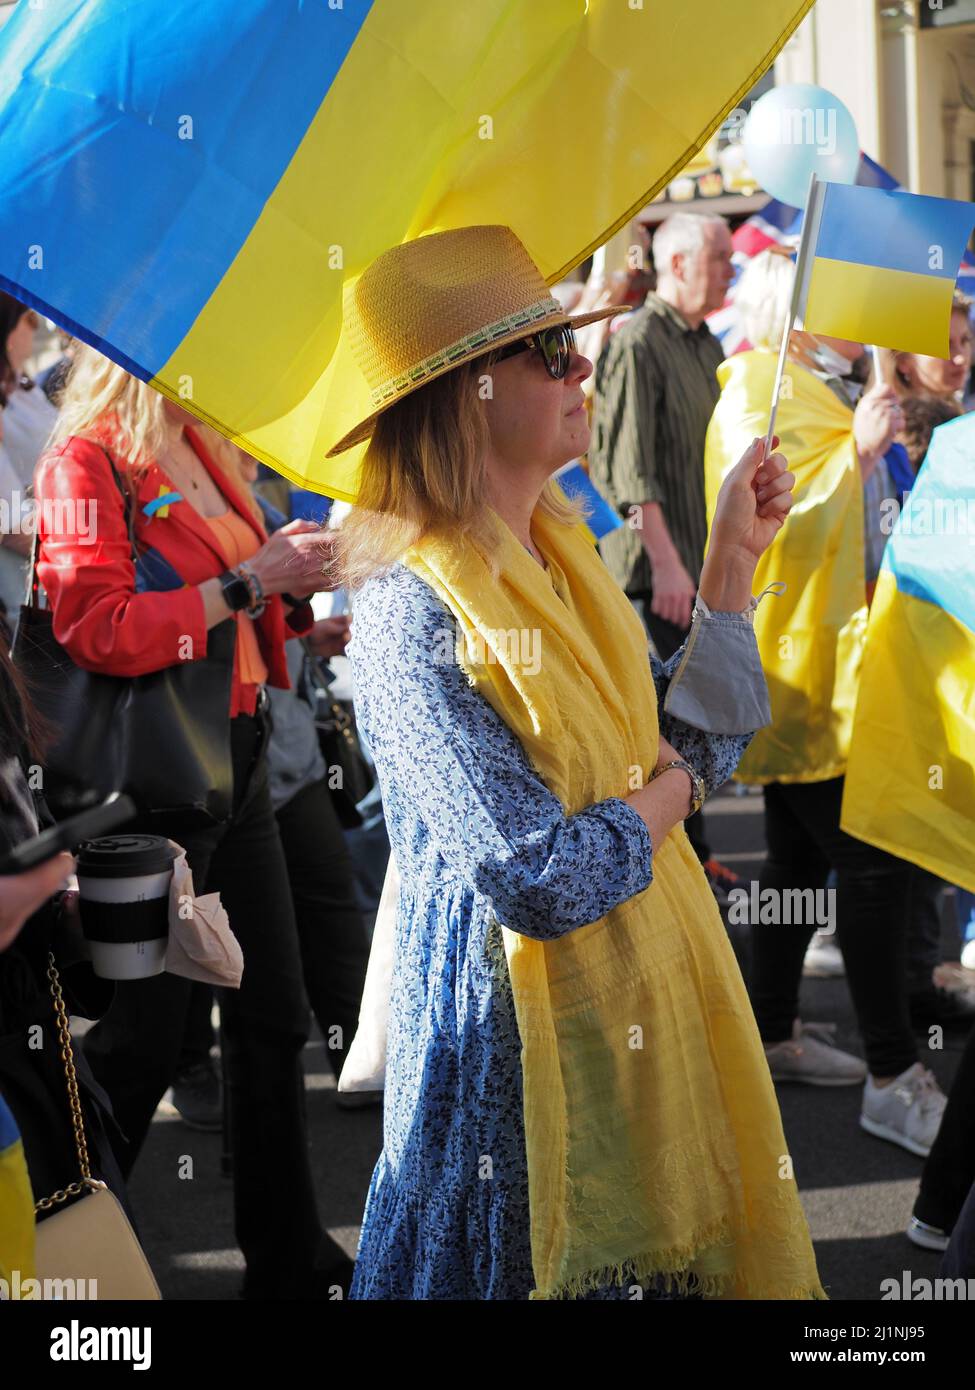 London,UK. 26th Mar 2022. A great march of solidarity with UKRAINE in LONDON.  Mayor of London Sadiq Khan leading the March The 31st day of Russia's invasion of Ukraine. 'The future of Ukraine should not be decided by Putin, but by the people of Ukraine themselves.' #StandWithUkraine #SaveUkraine  Credit: Marcin Libera/Alamy Live News Stock Photo